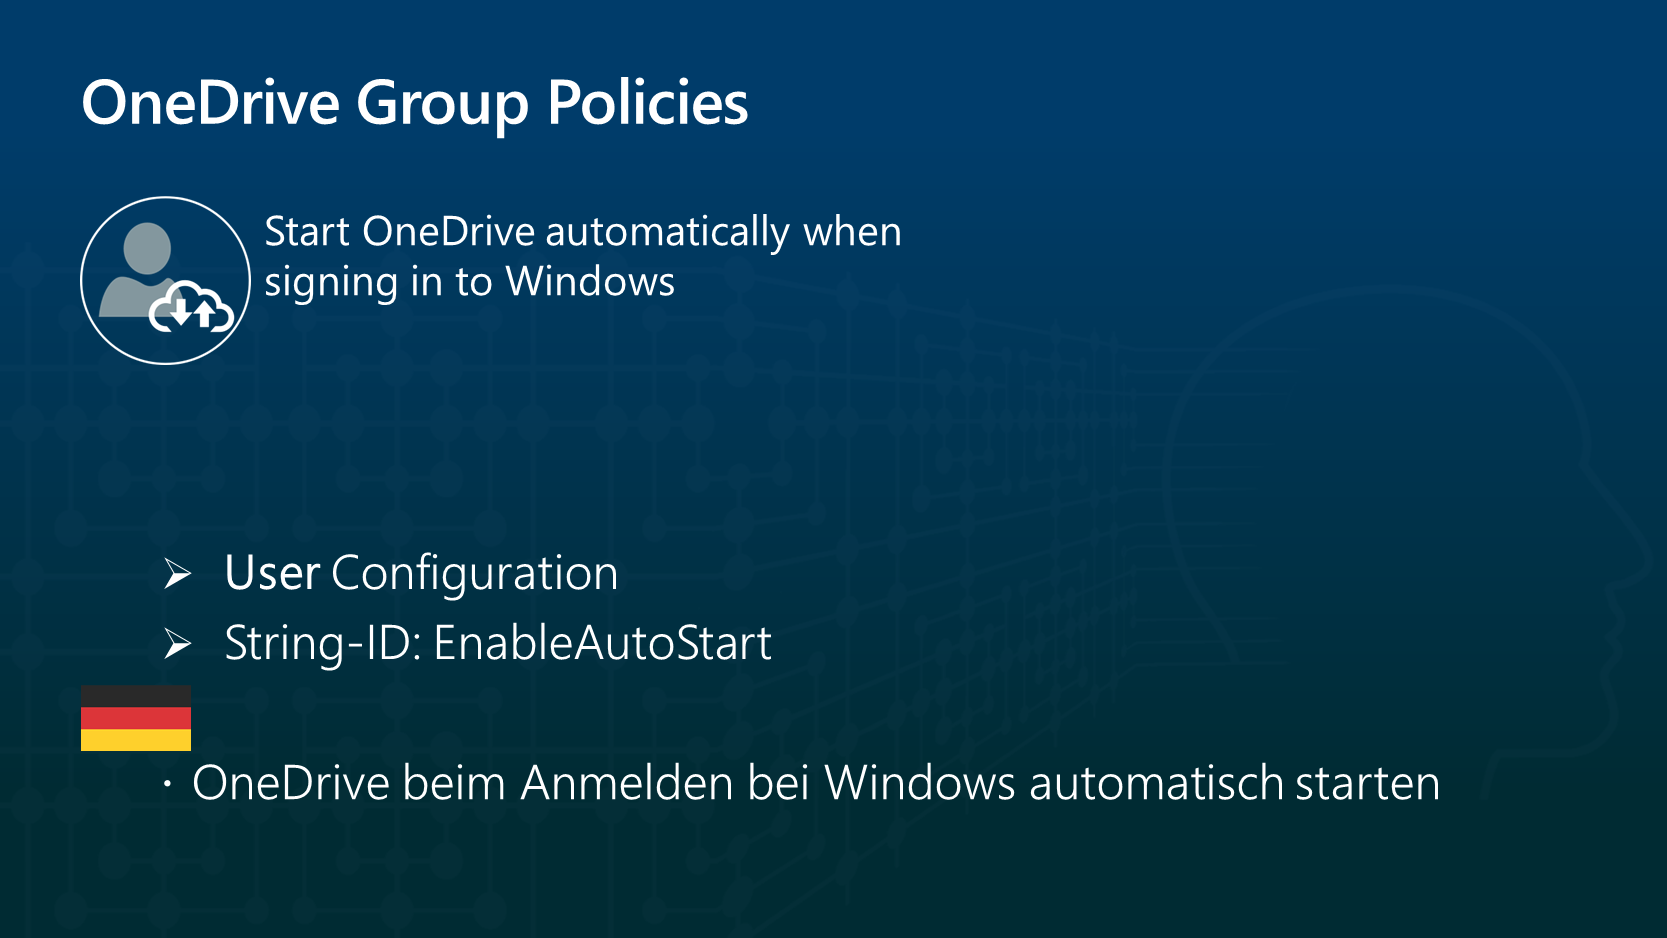 The image shows the OneDrive user configuration group policy for 'Start OneDrive automatically when signing in to Windows' with string ID 'EnableAutoStart'.